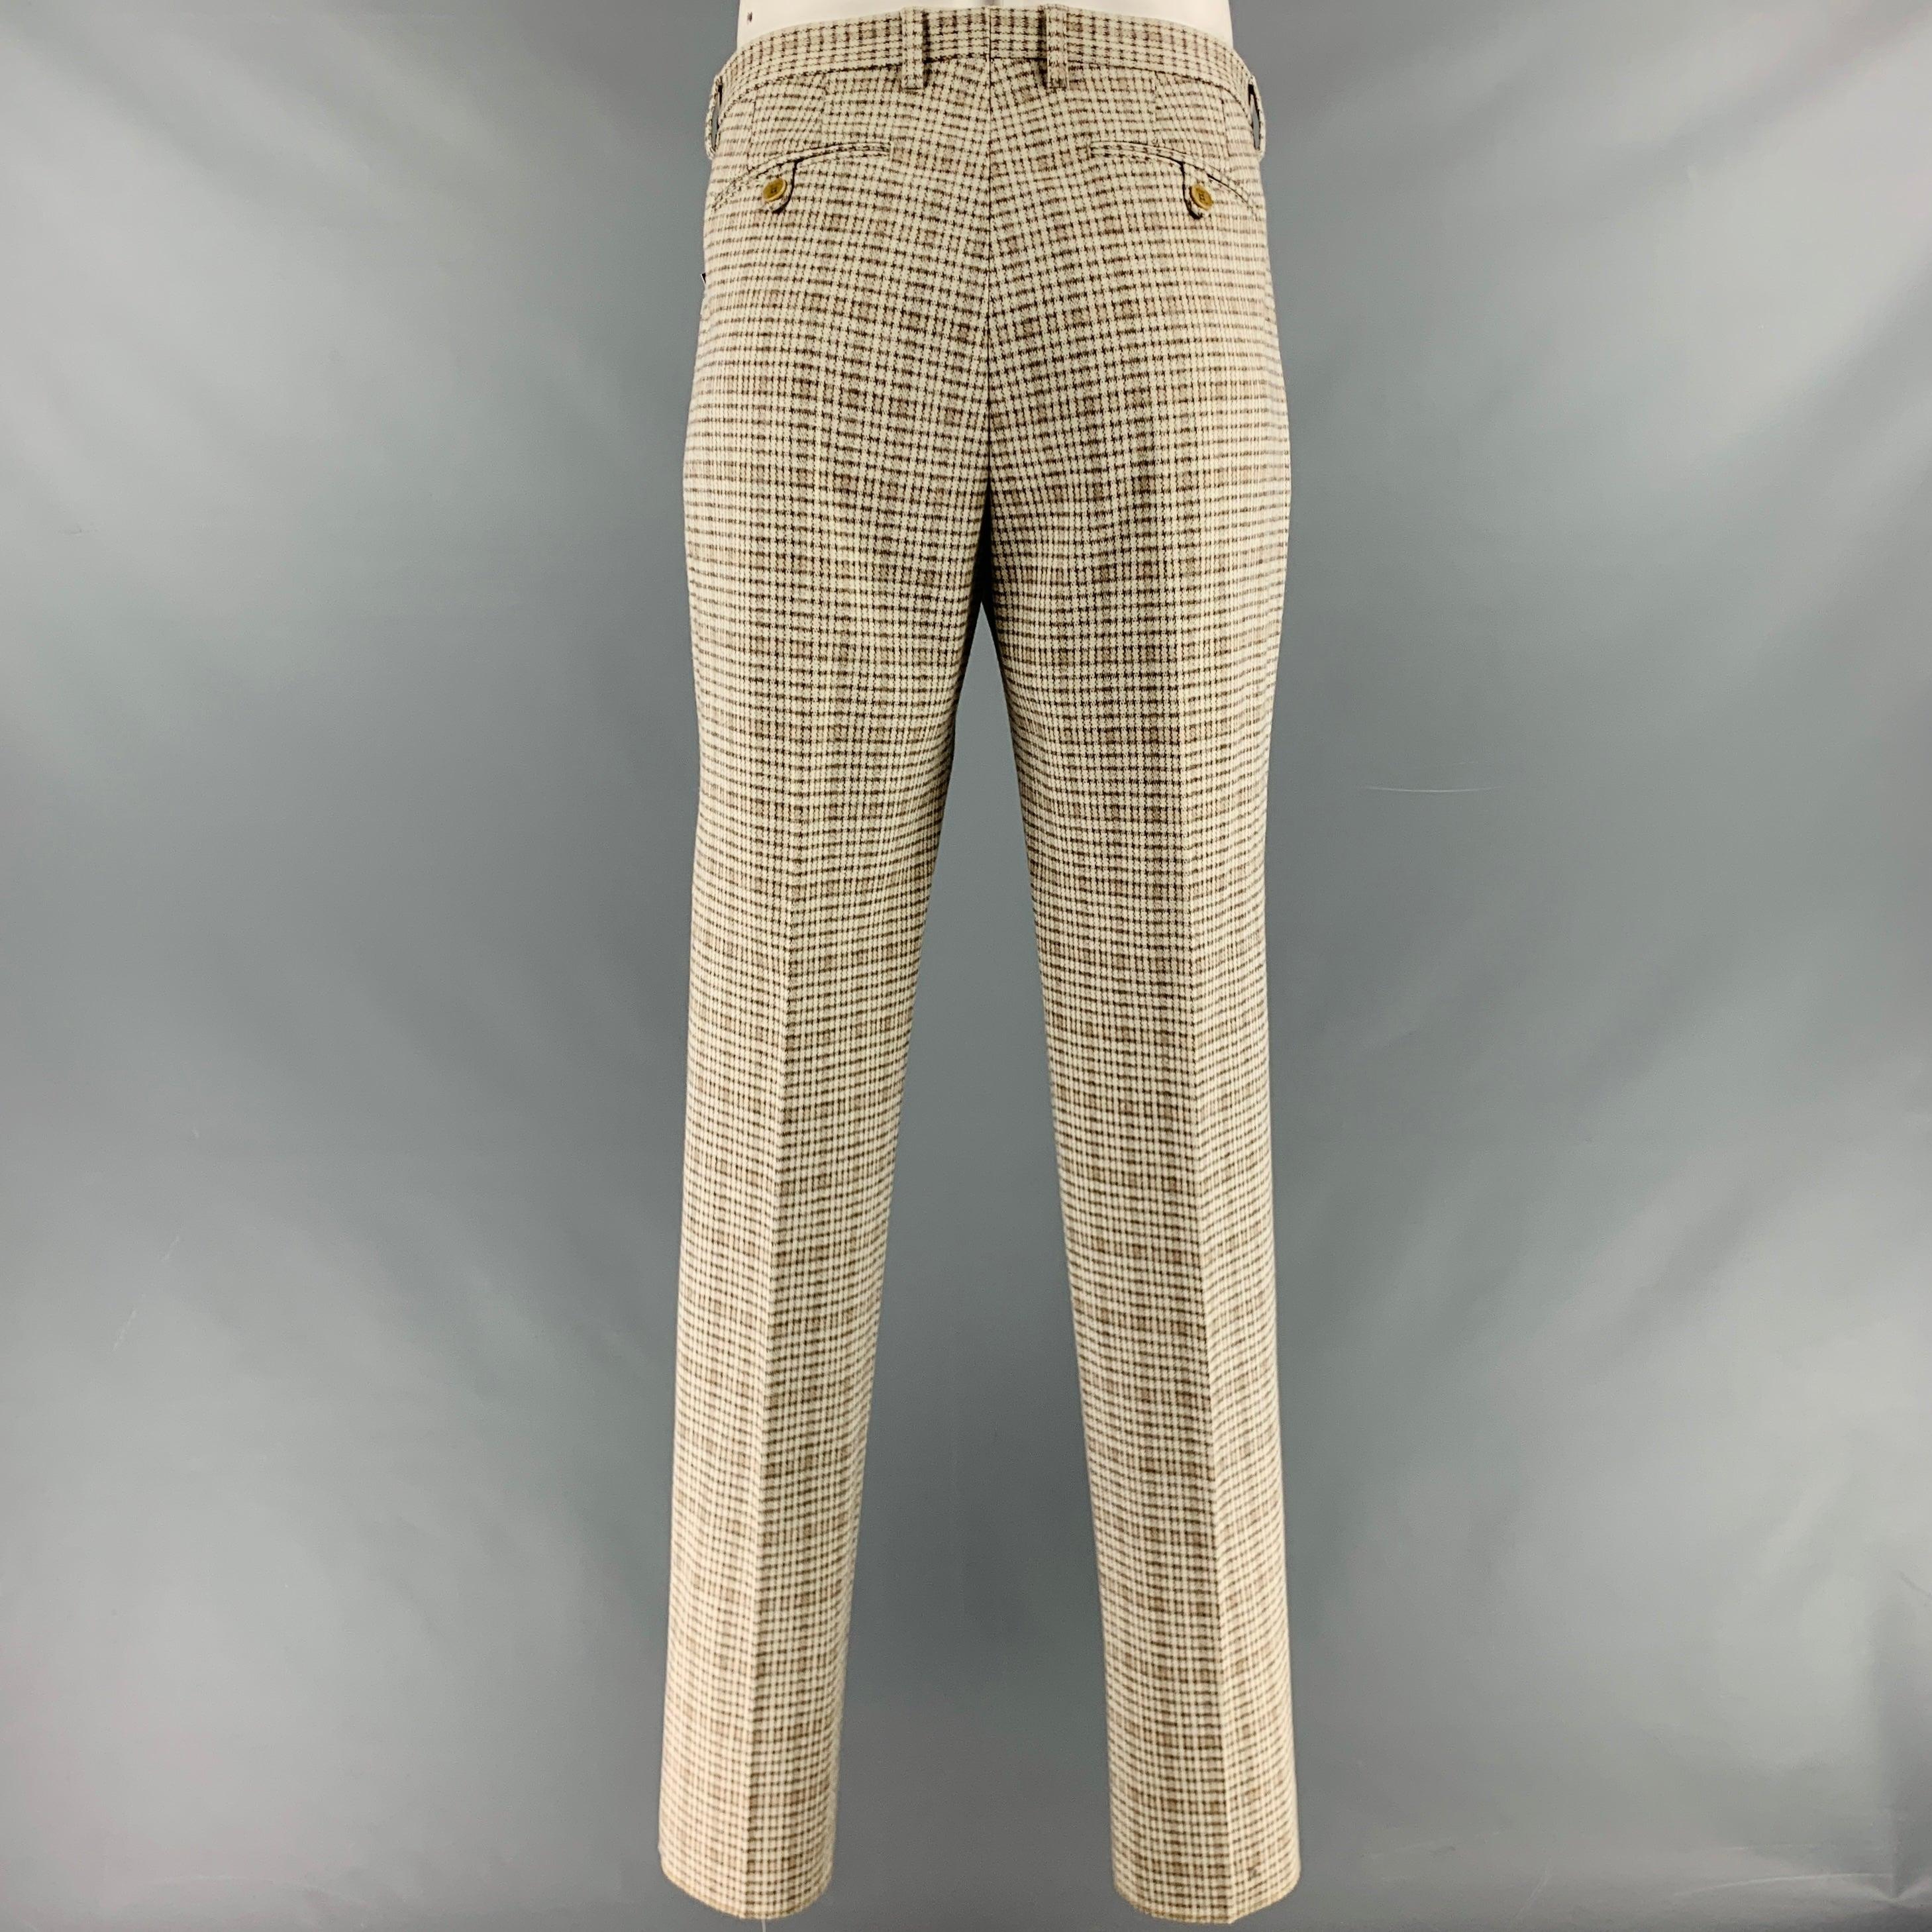 ETRO Size 38 Grey Taupe Houndstooth Cotton Wool Flat Front Dress Pants In Excellent Condition For Sale In San Francisco, CA